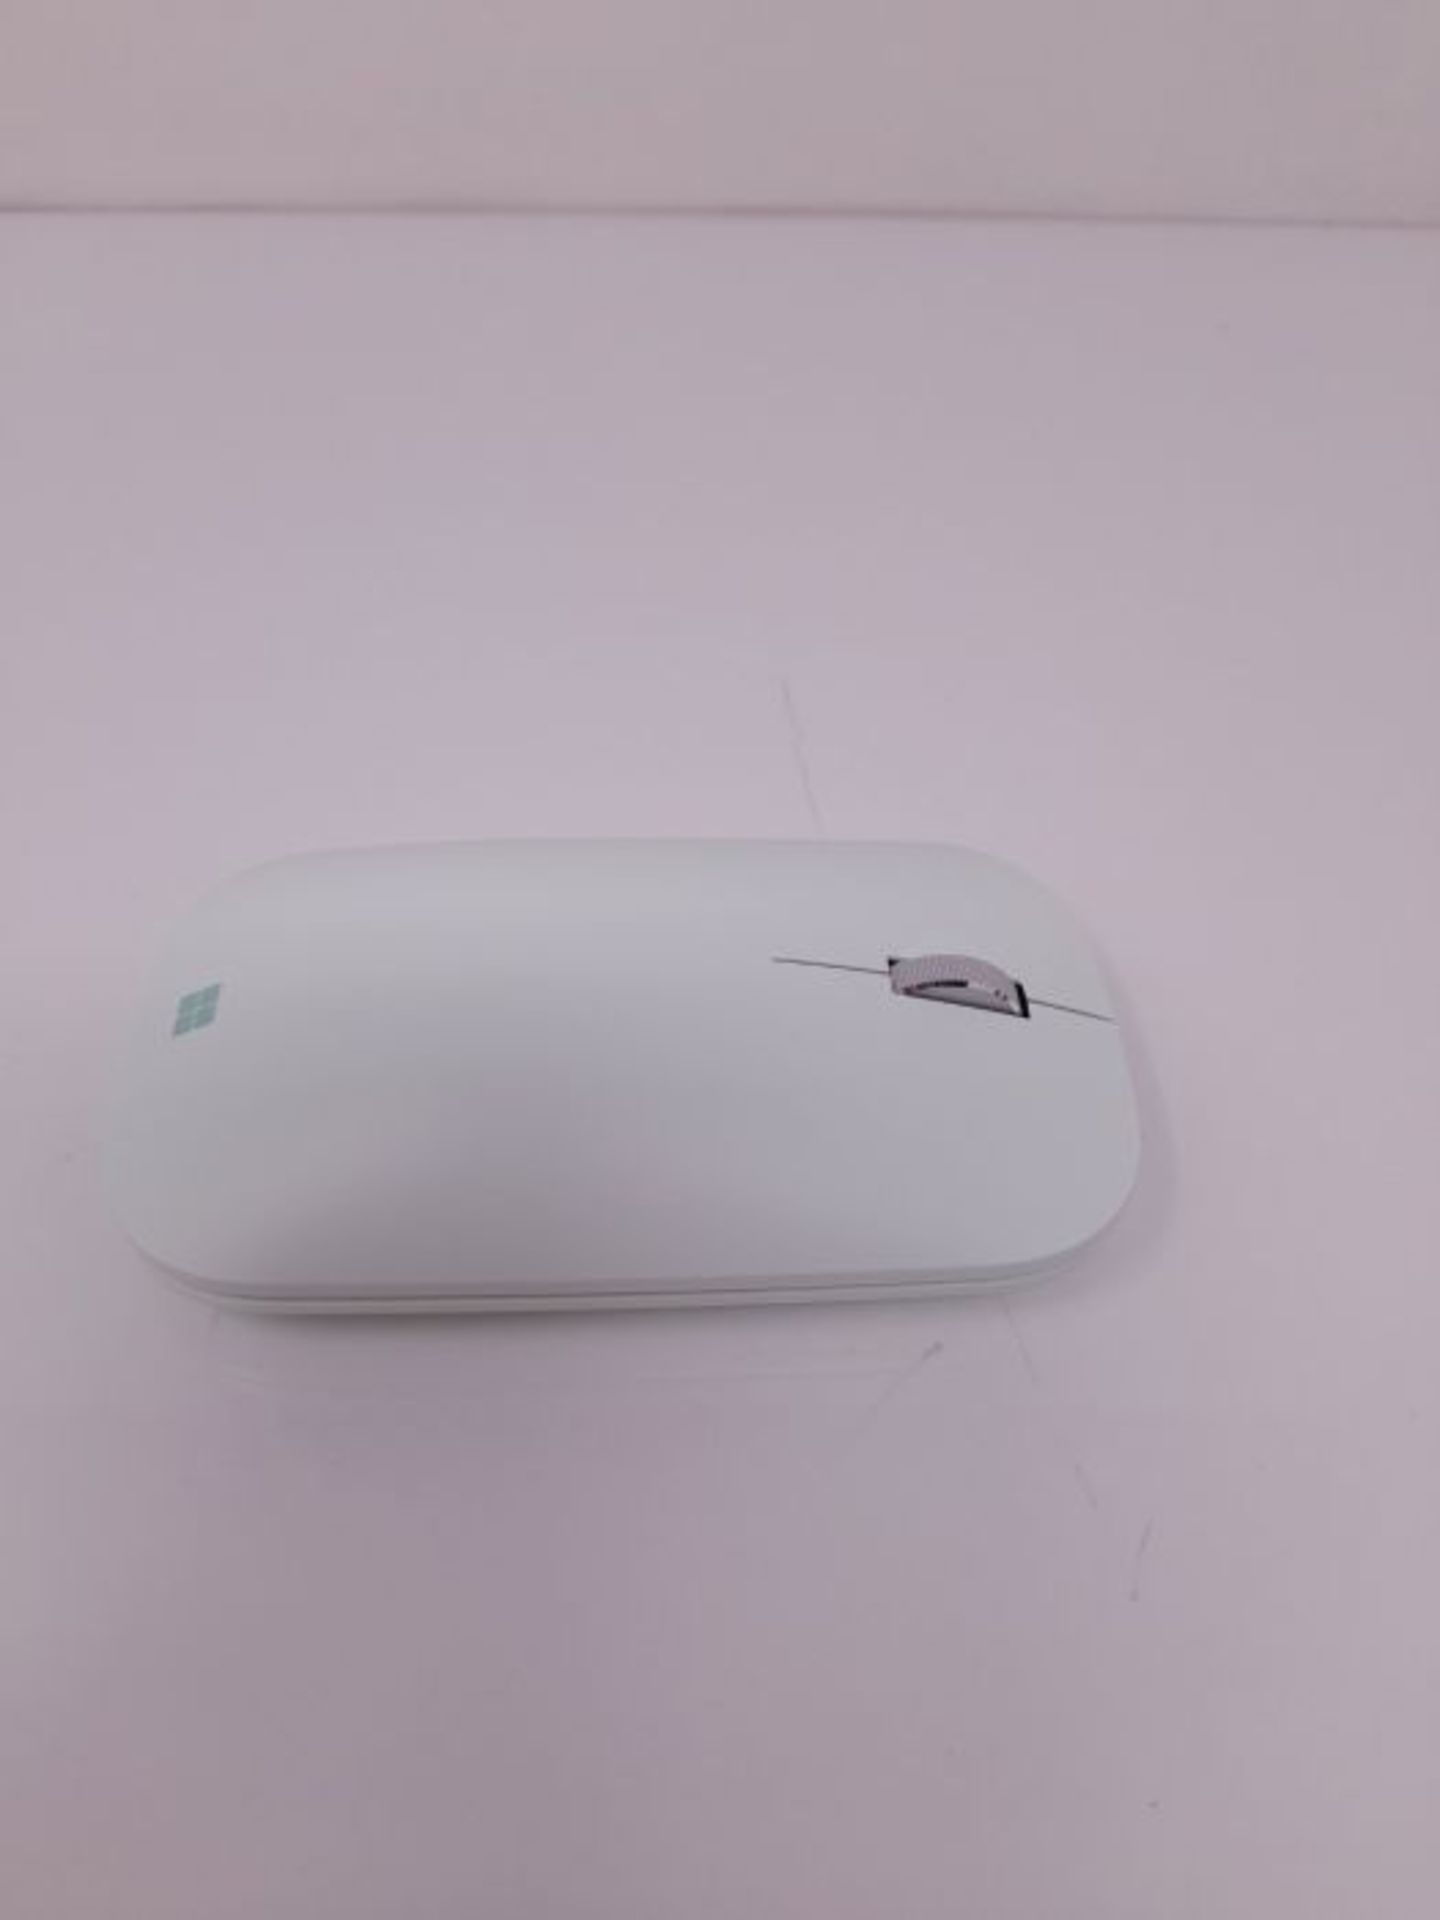 Microsoft Modern Mobile Bluetooth Mouse - Mint - Image 3 of 3